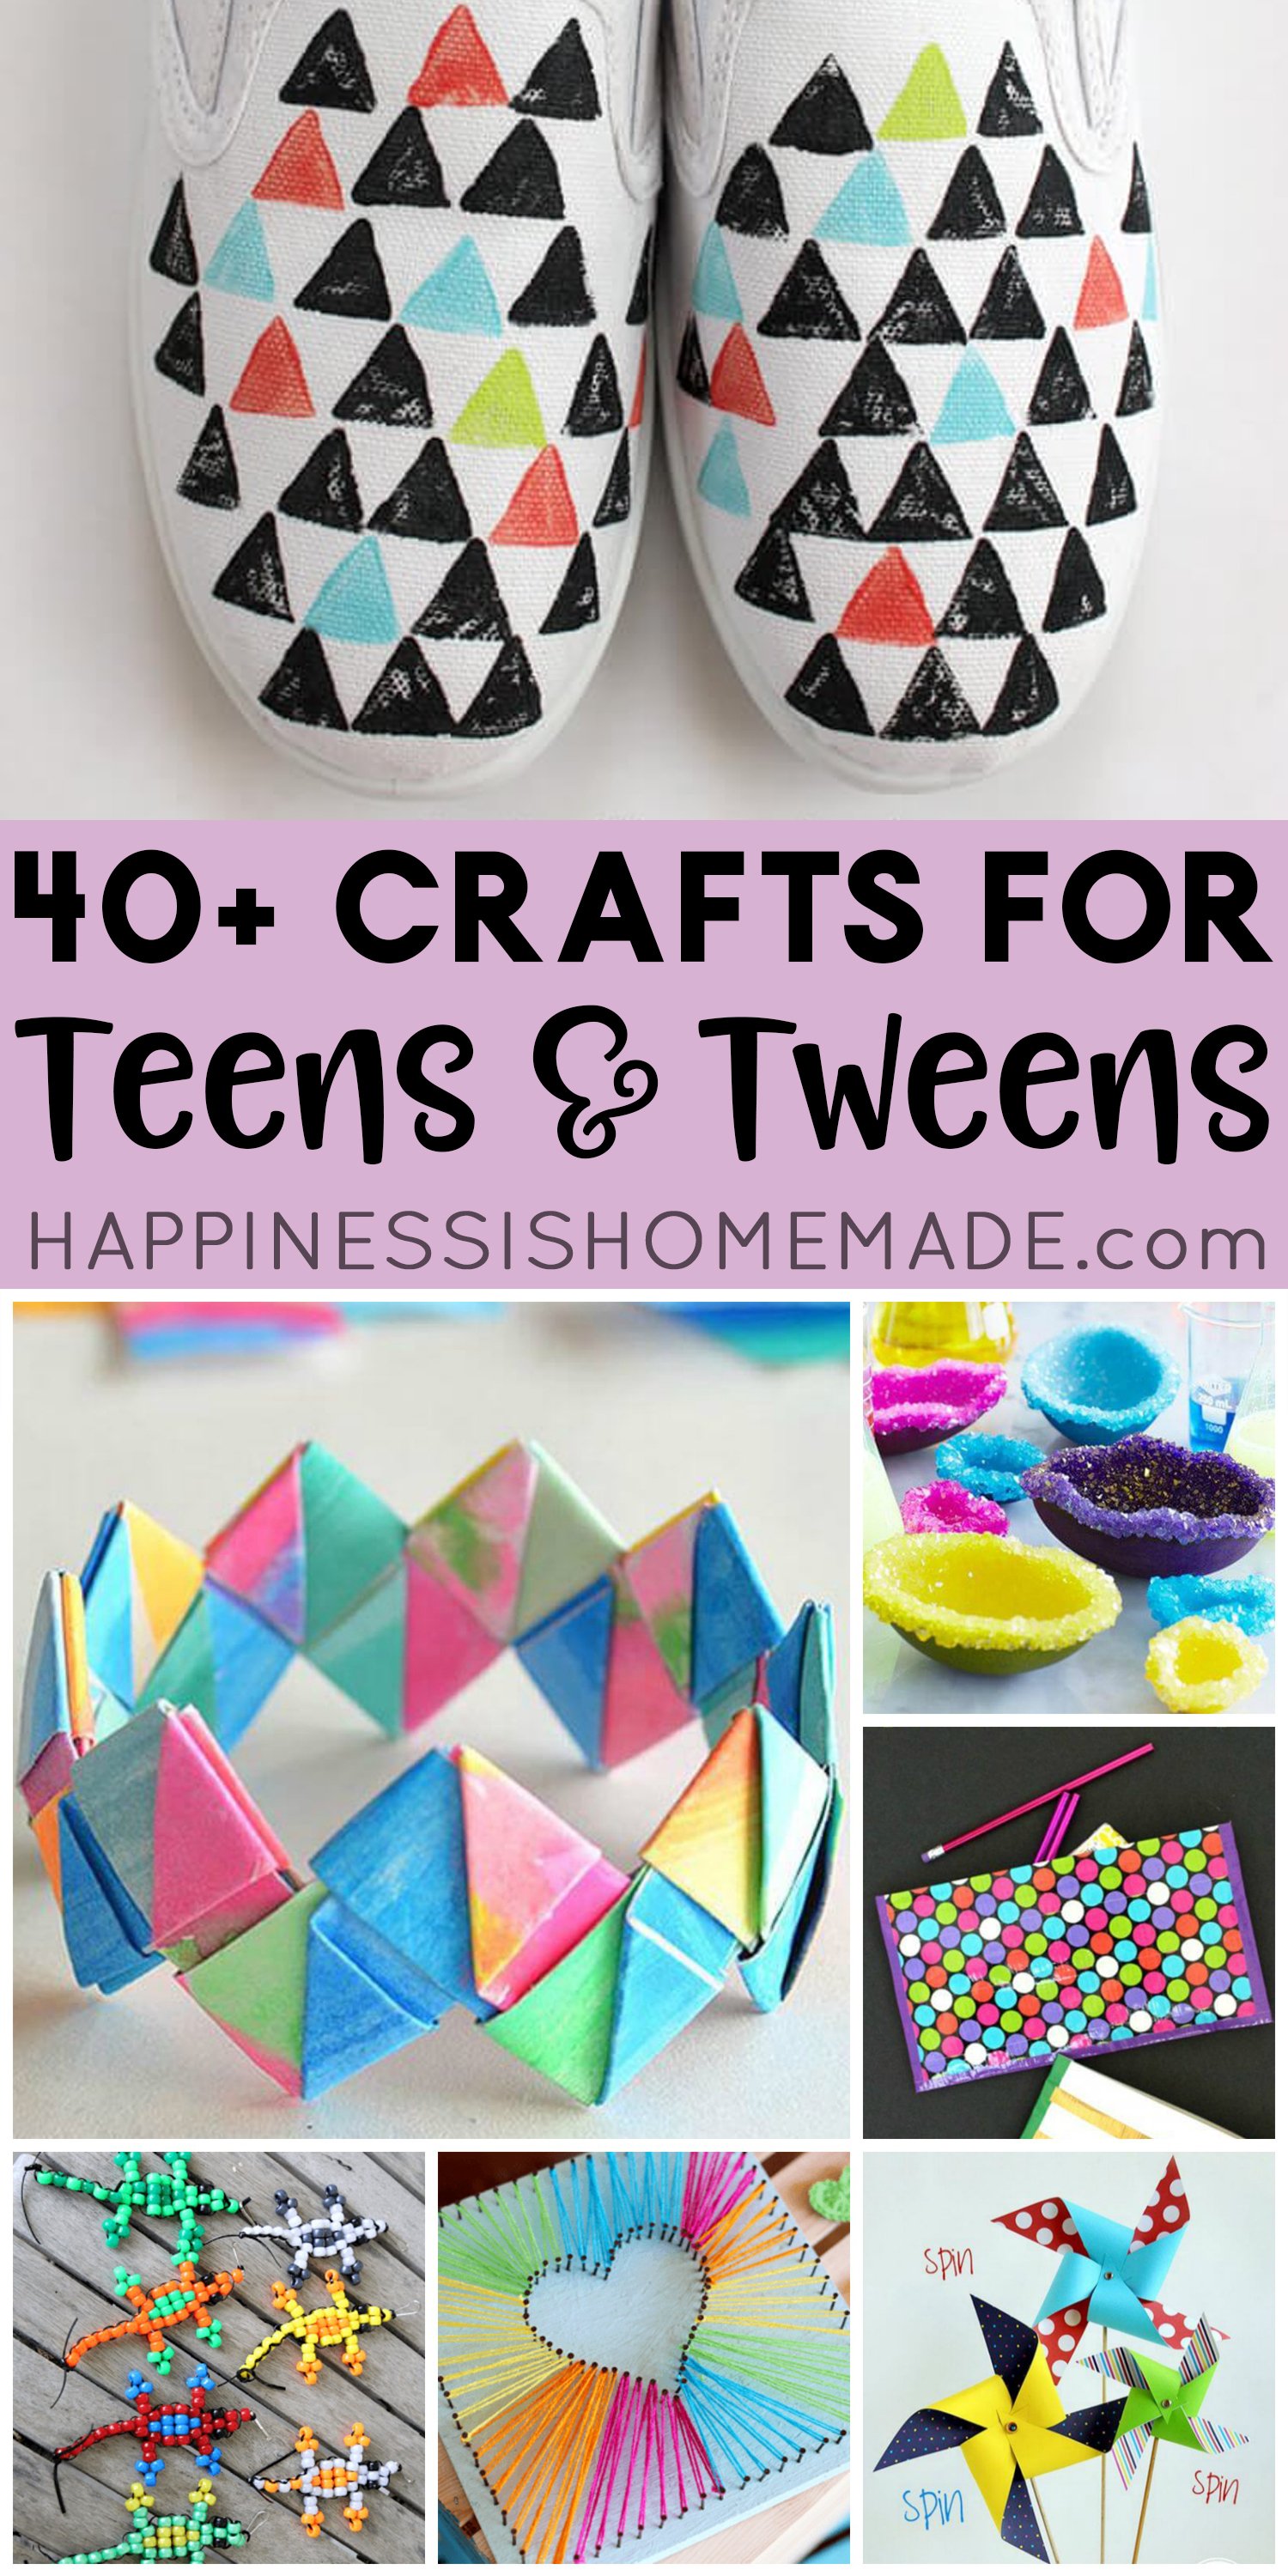 25 Awesome Projects for Tween and Teen Boys (Ages 10 and Up) - Frugal Fun  For Boys and Girls